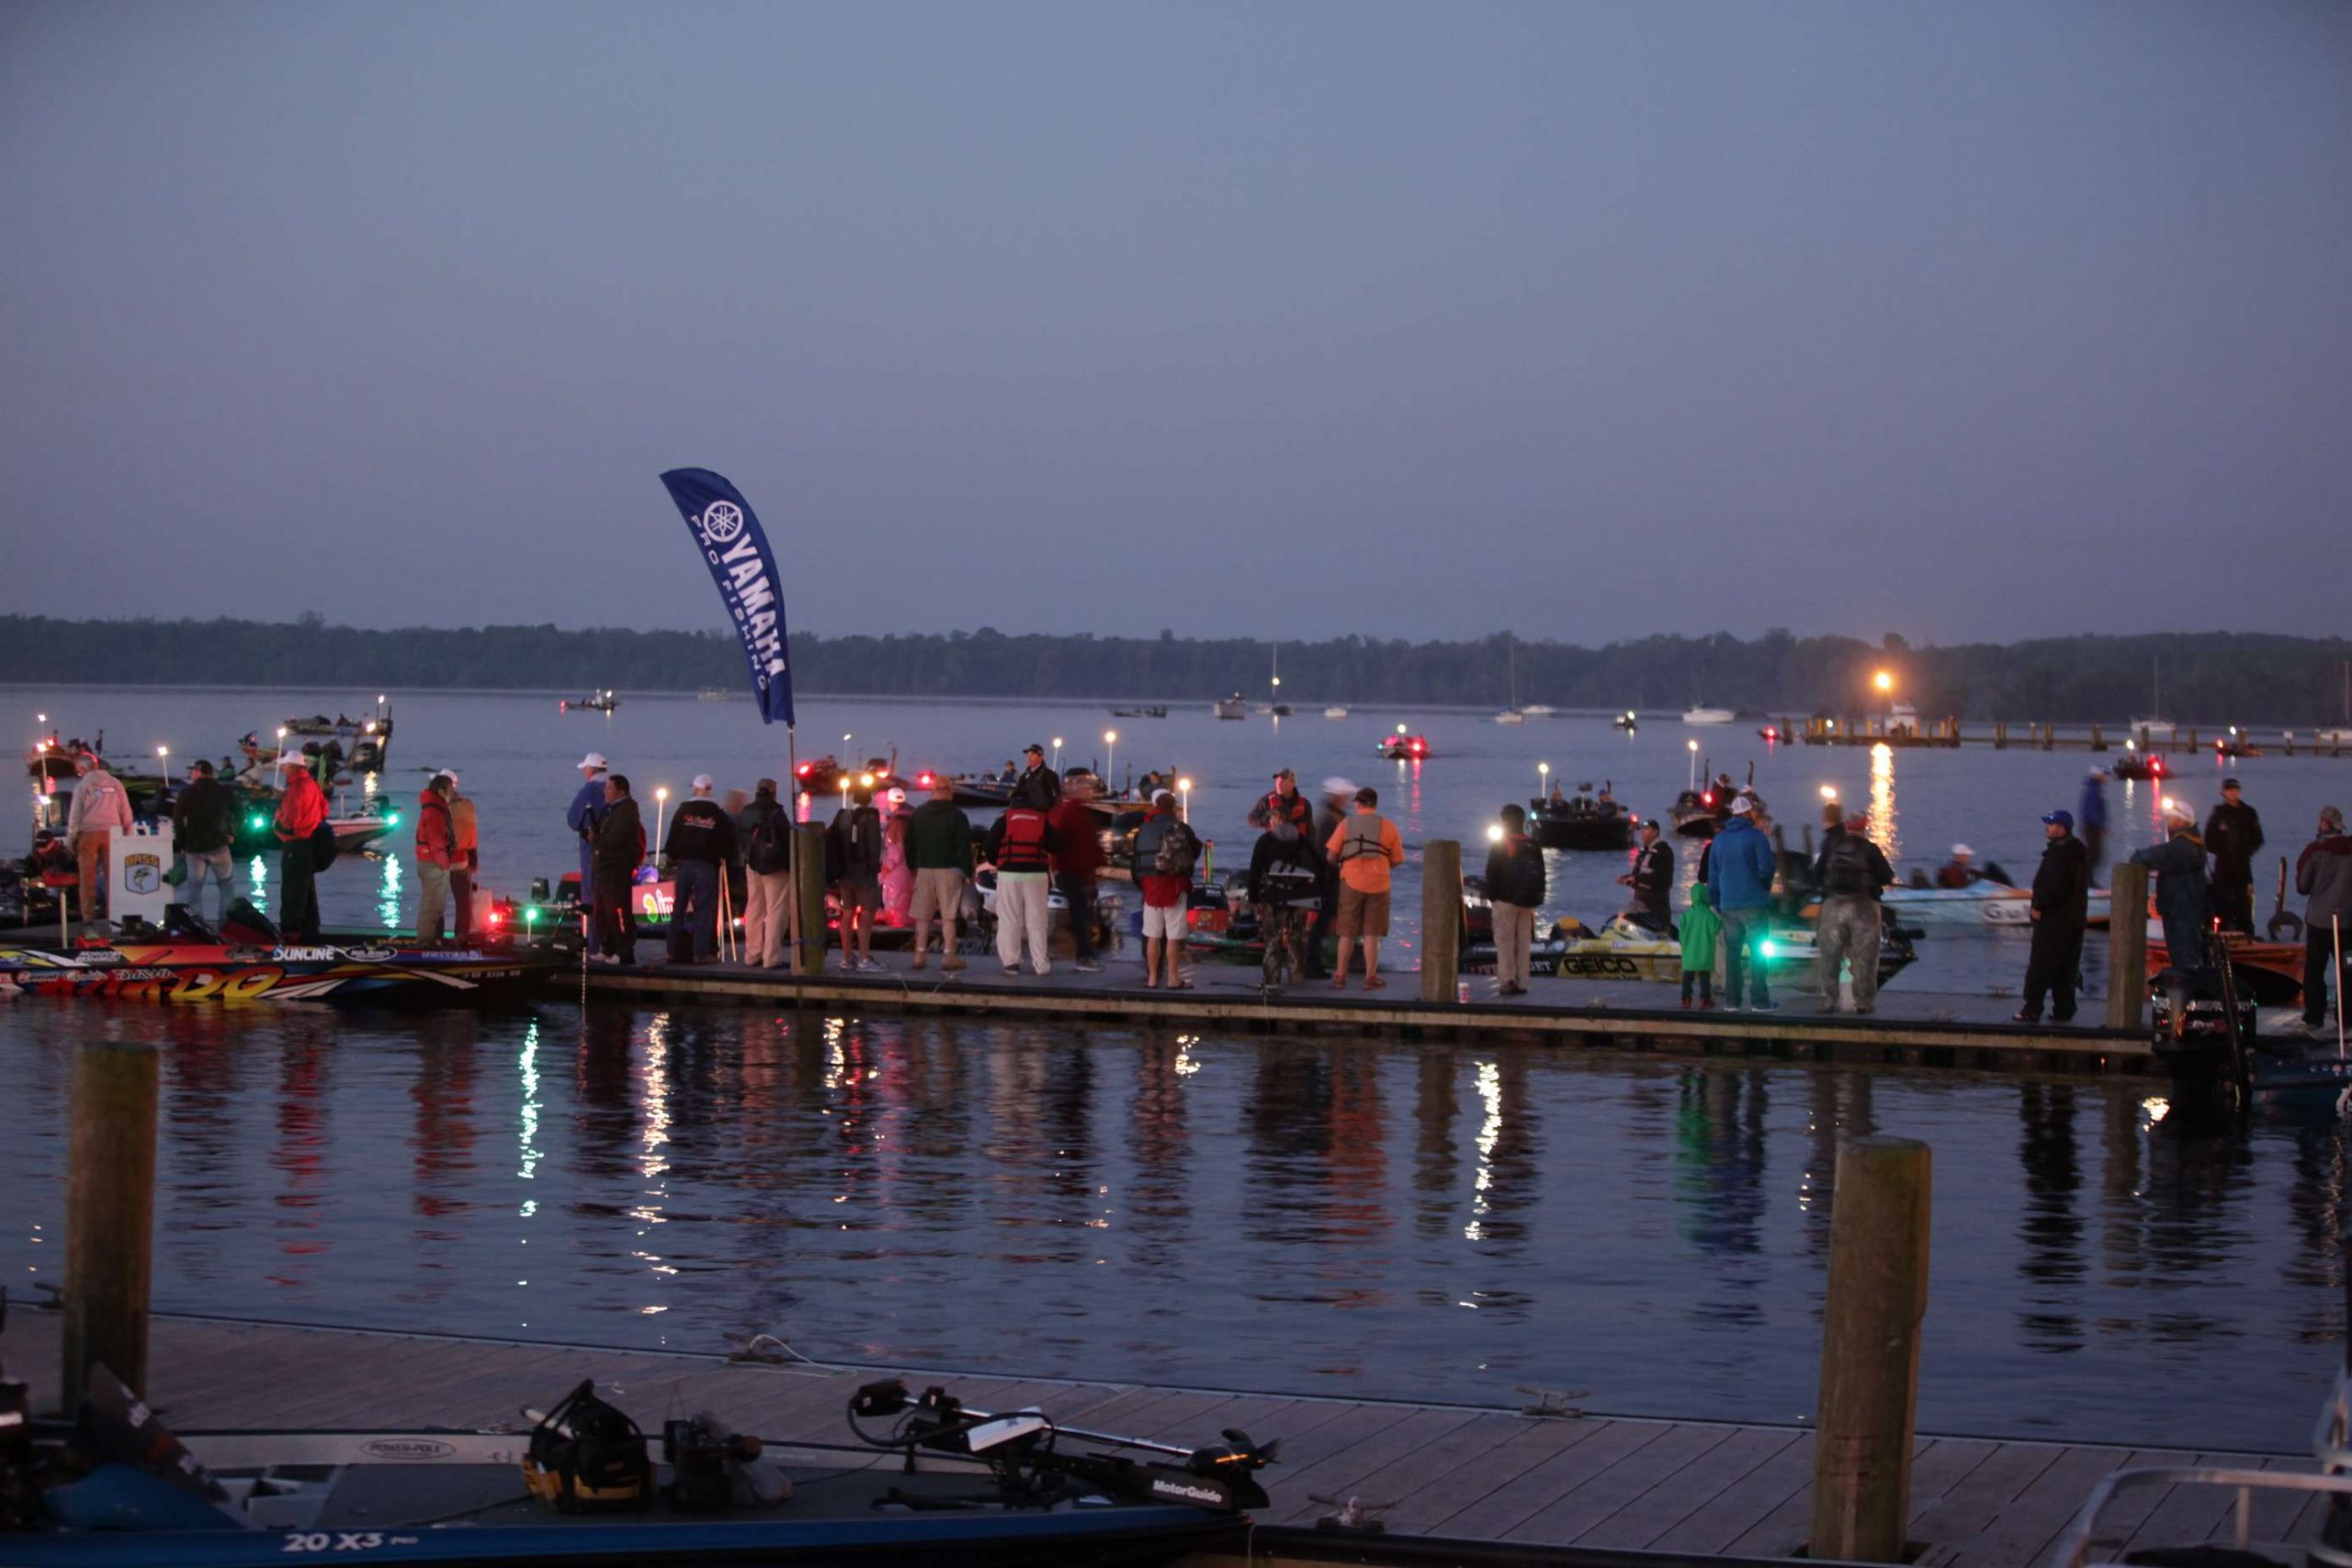 Day 2 dawns on the St. Johns River for the Bassmaster Elite Series tournament. 